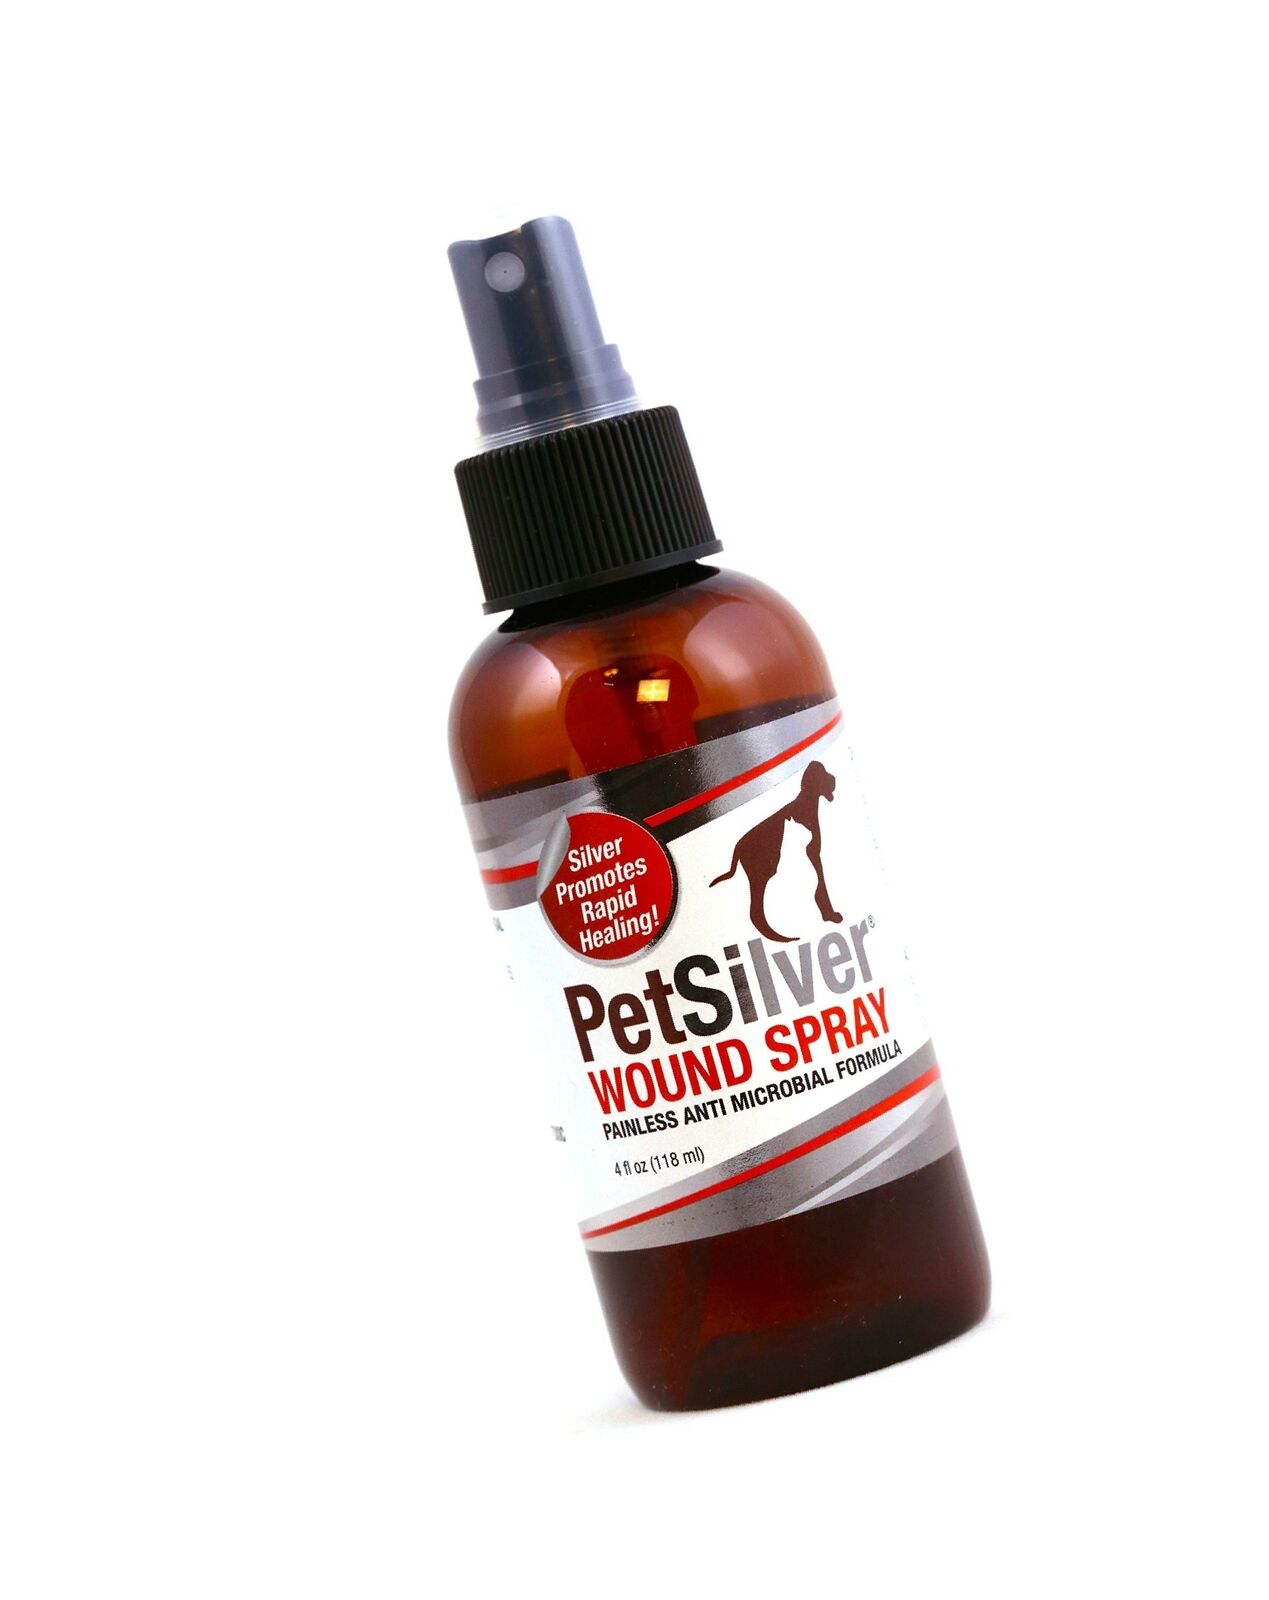 Petsilver Wound Spray With Chelated Silver. Rapid Healing For Hot Spots, Cuts...